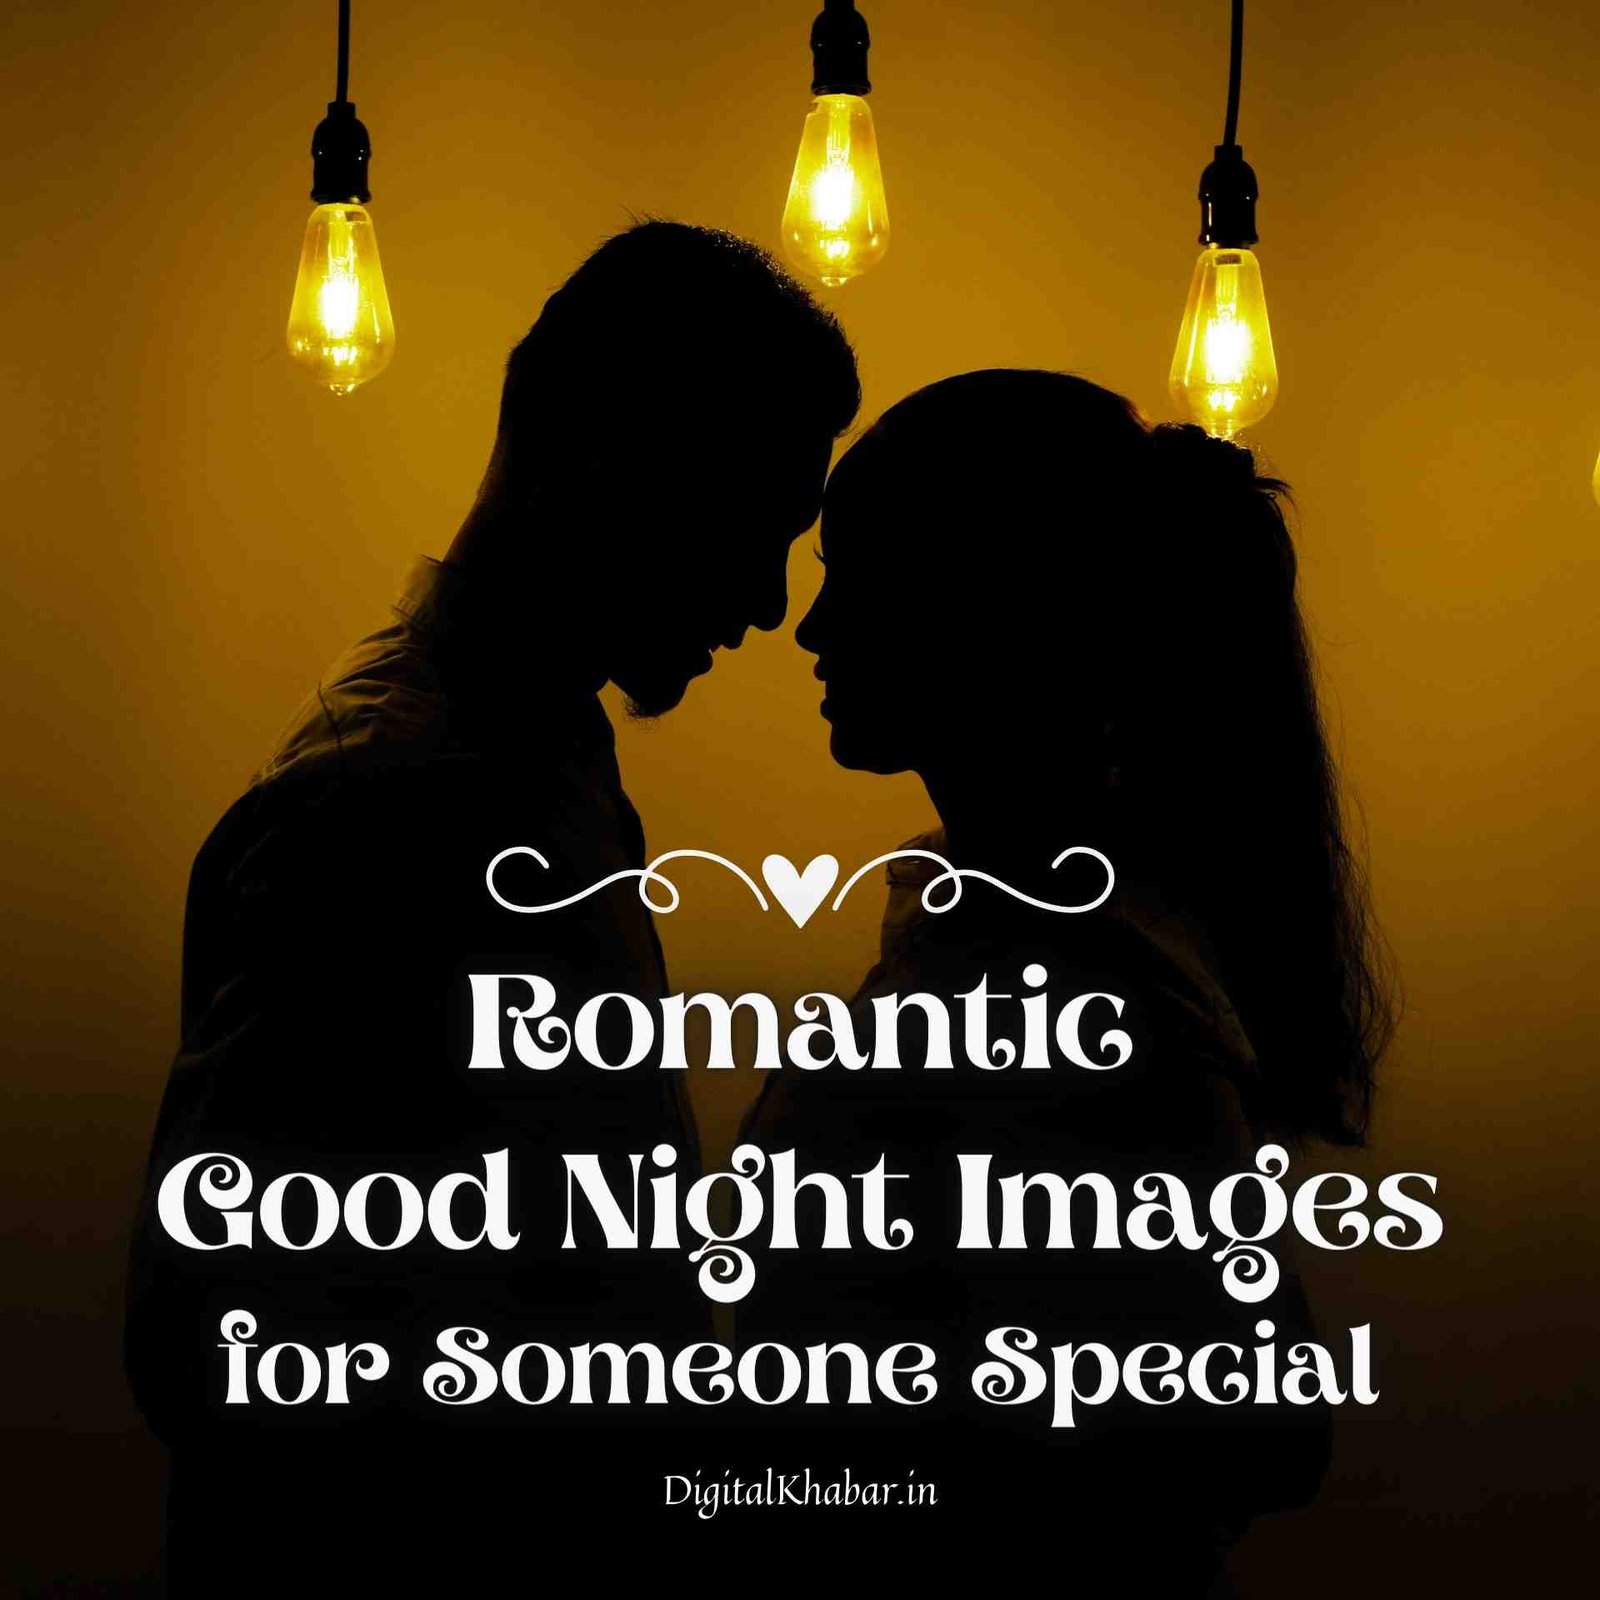 Romantic good night images for Couples